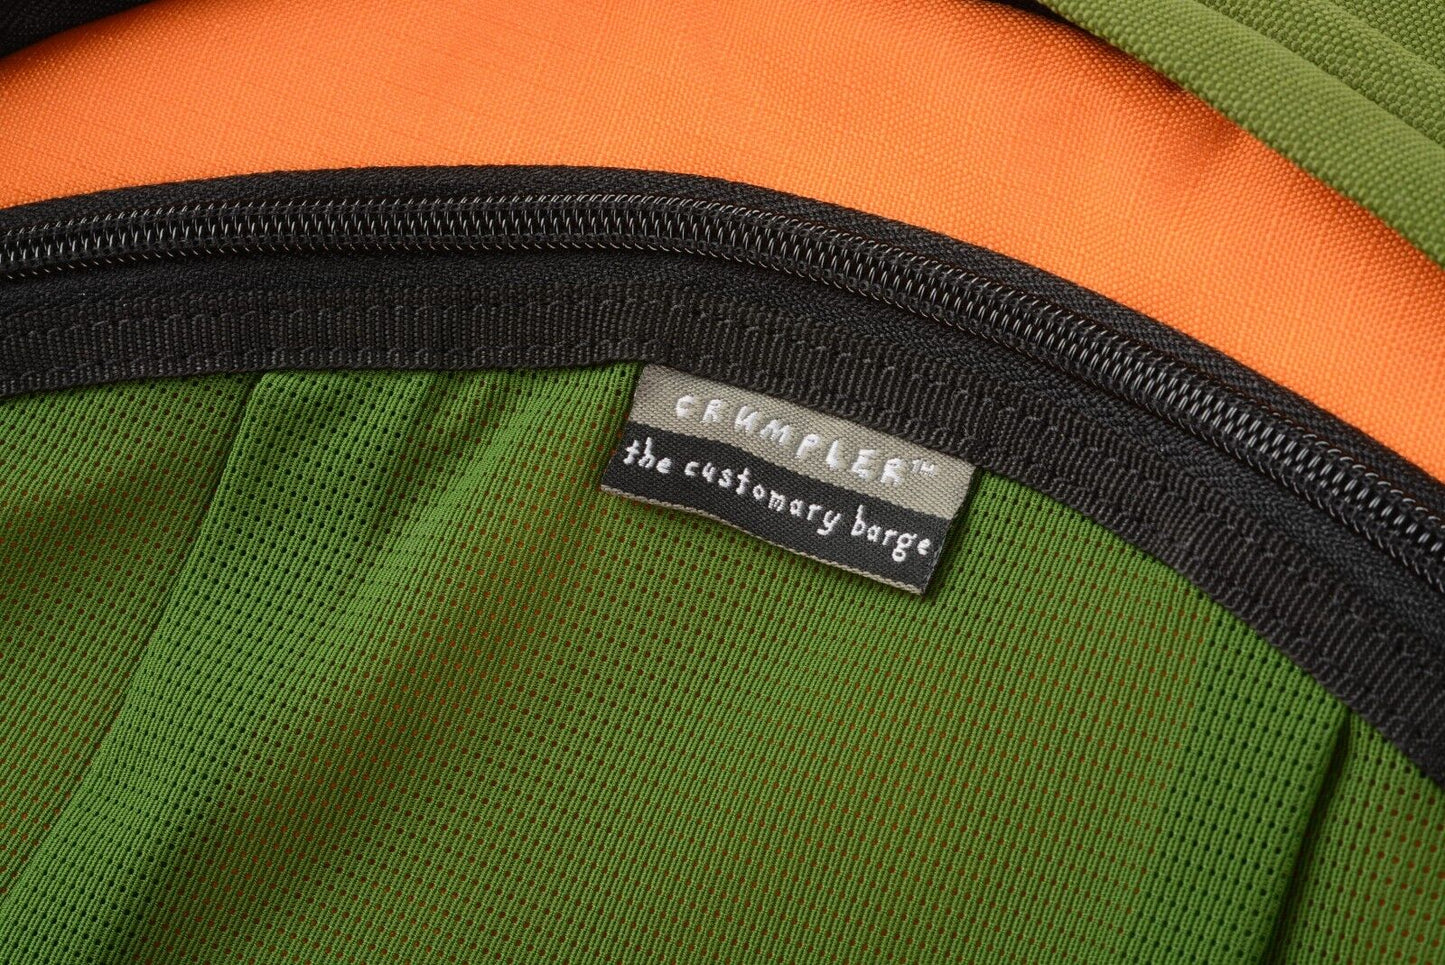 EXC++ CRUMPLER THE CUSTOMARY BARGE DELUXE OLIVE / YELLOW BARELY USED, GREAT!